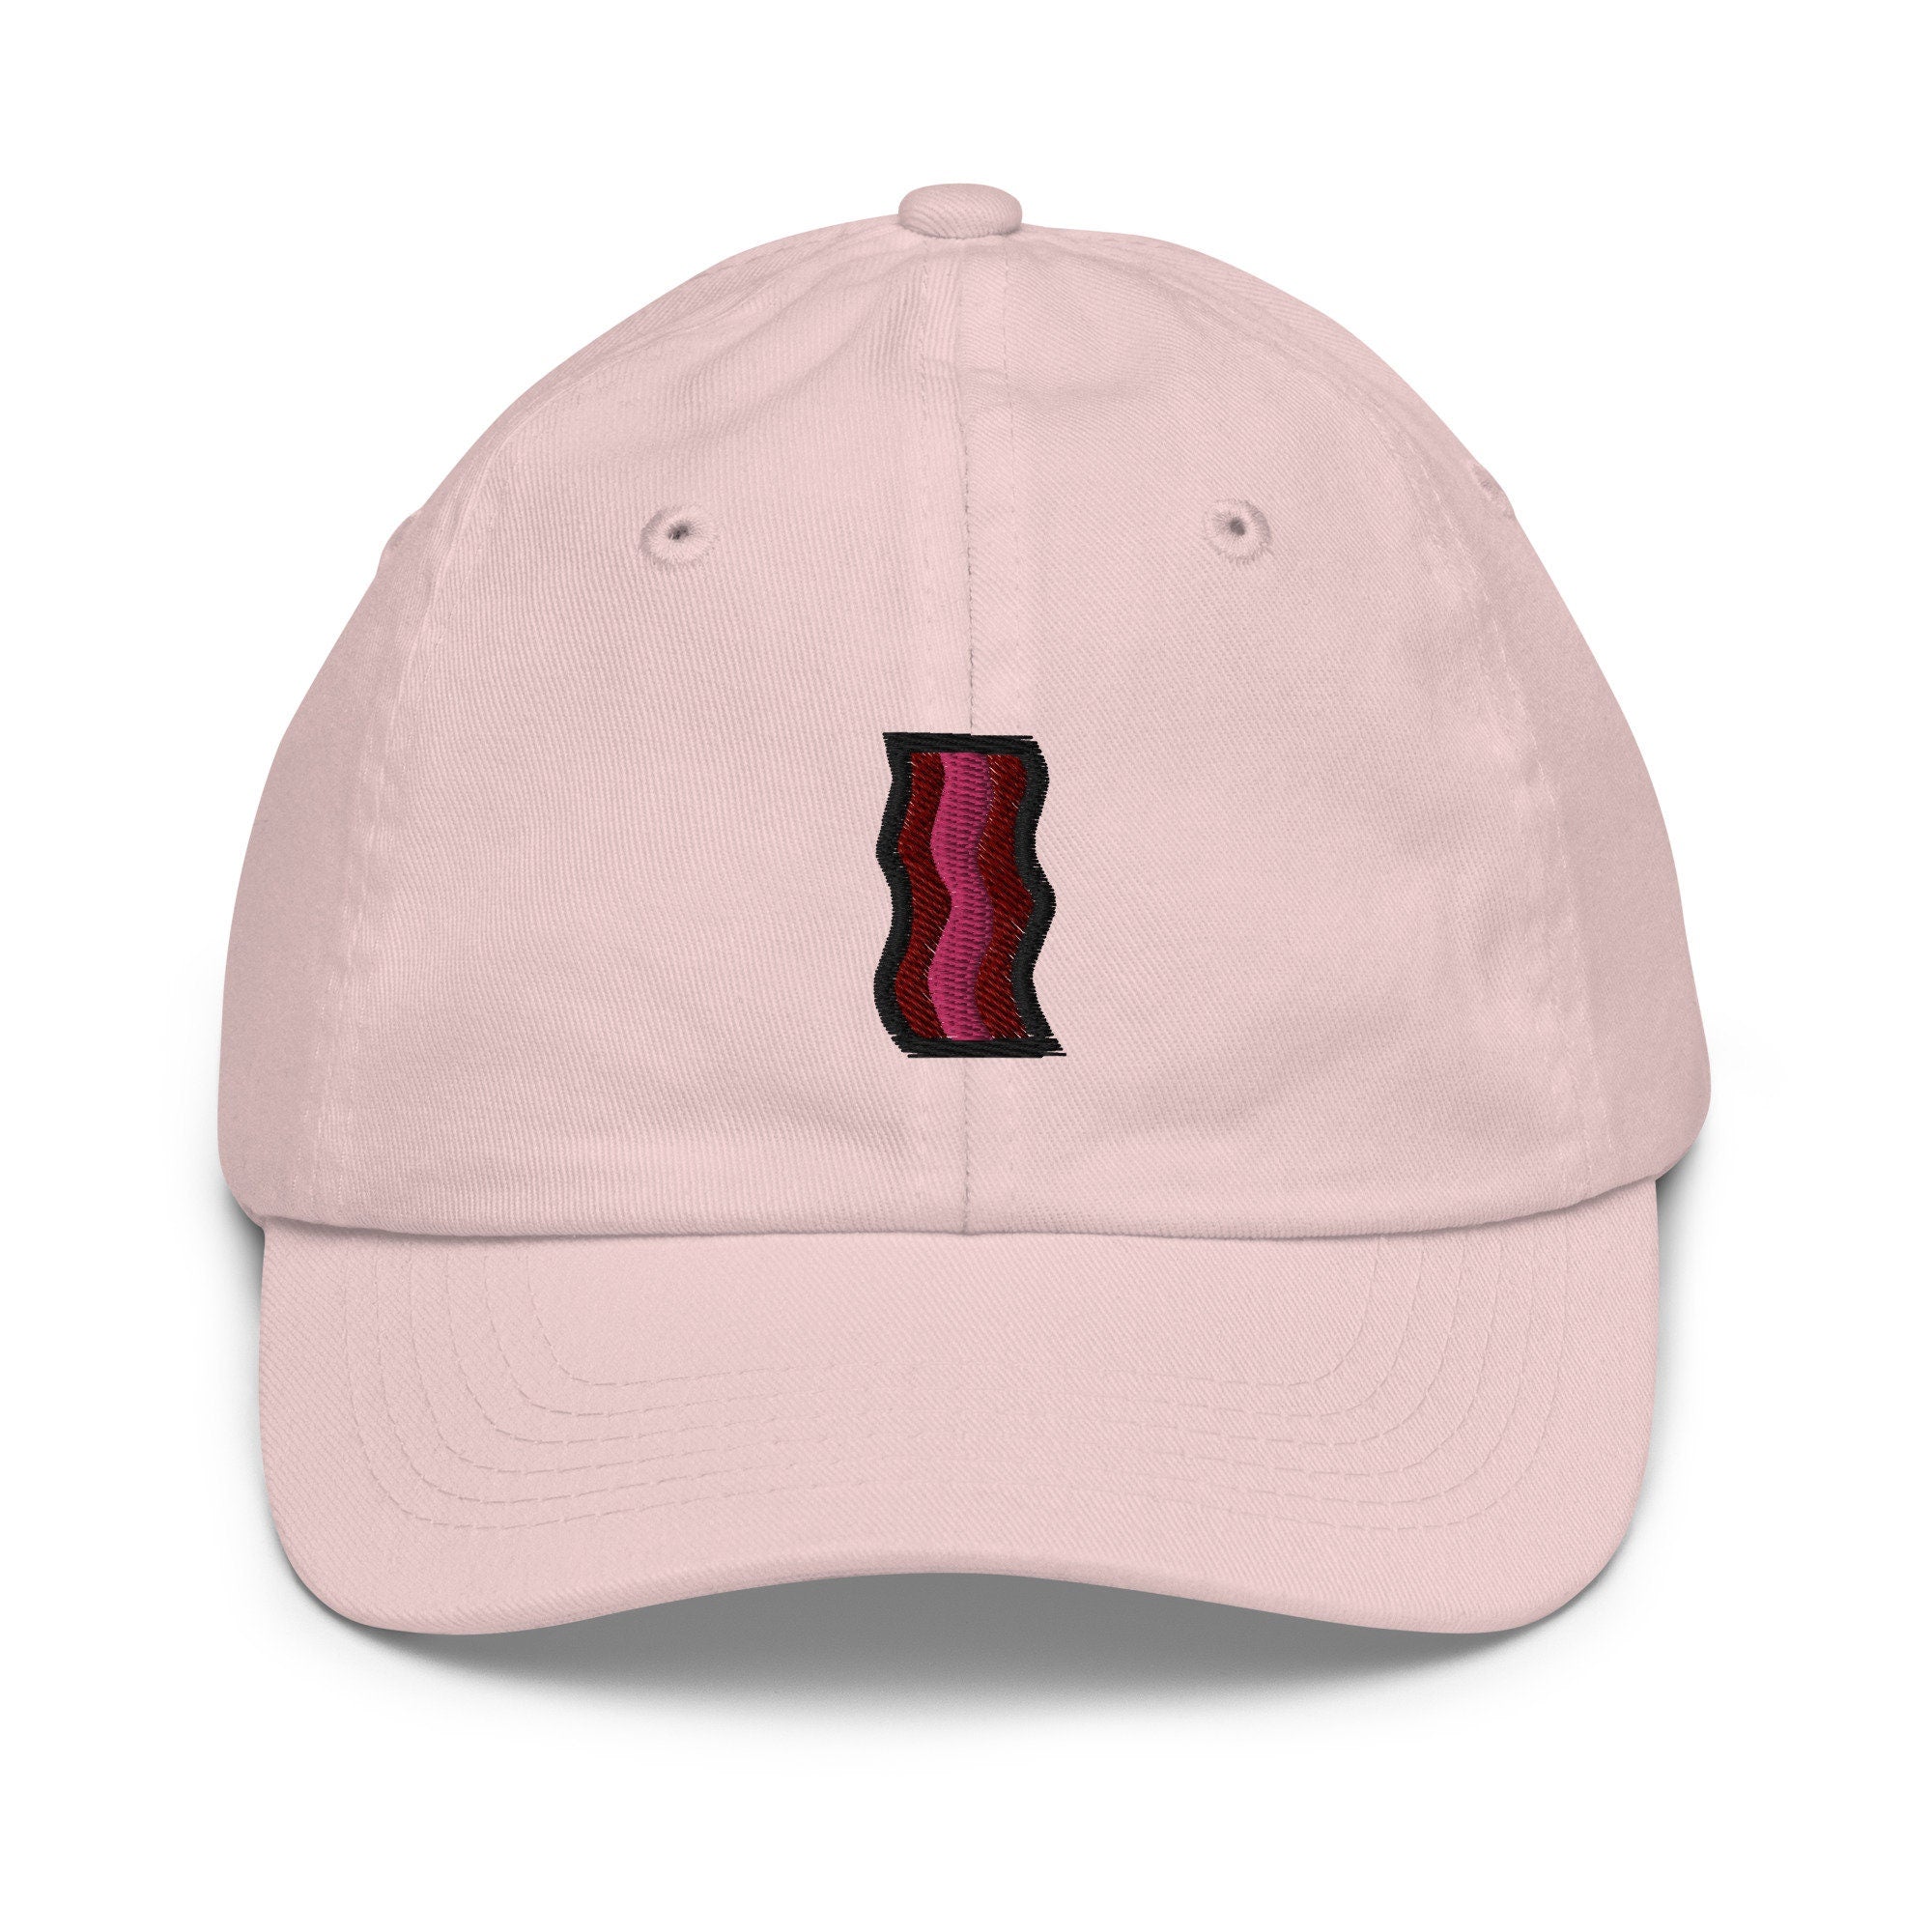 Bacon Youth Baseball Cap, Embroidered Kids Hat, Childrens Hat Gift - Multiple Colors